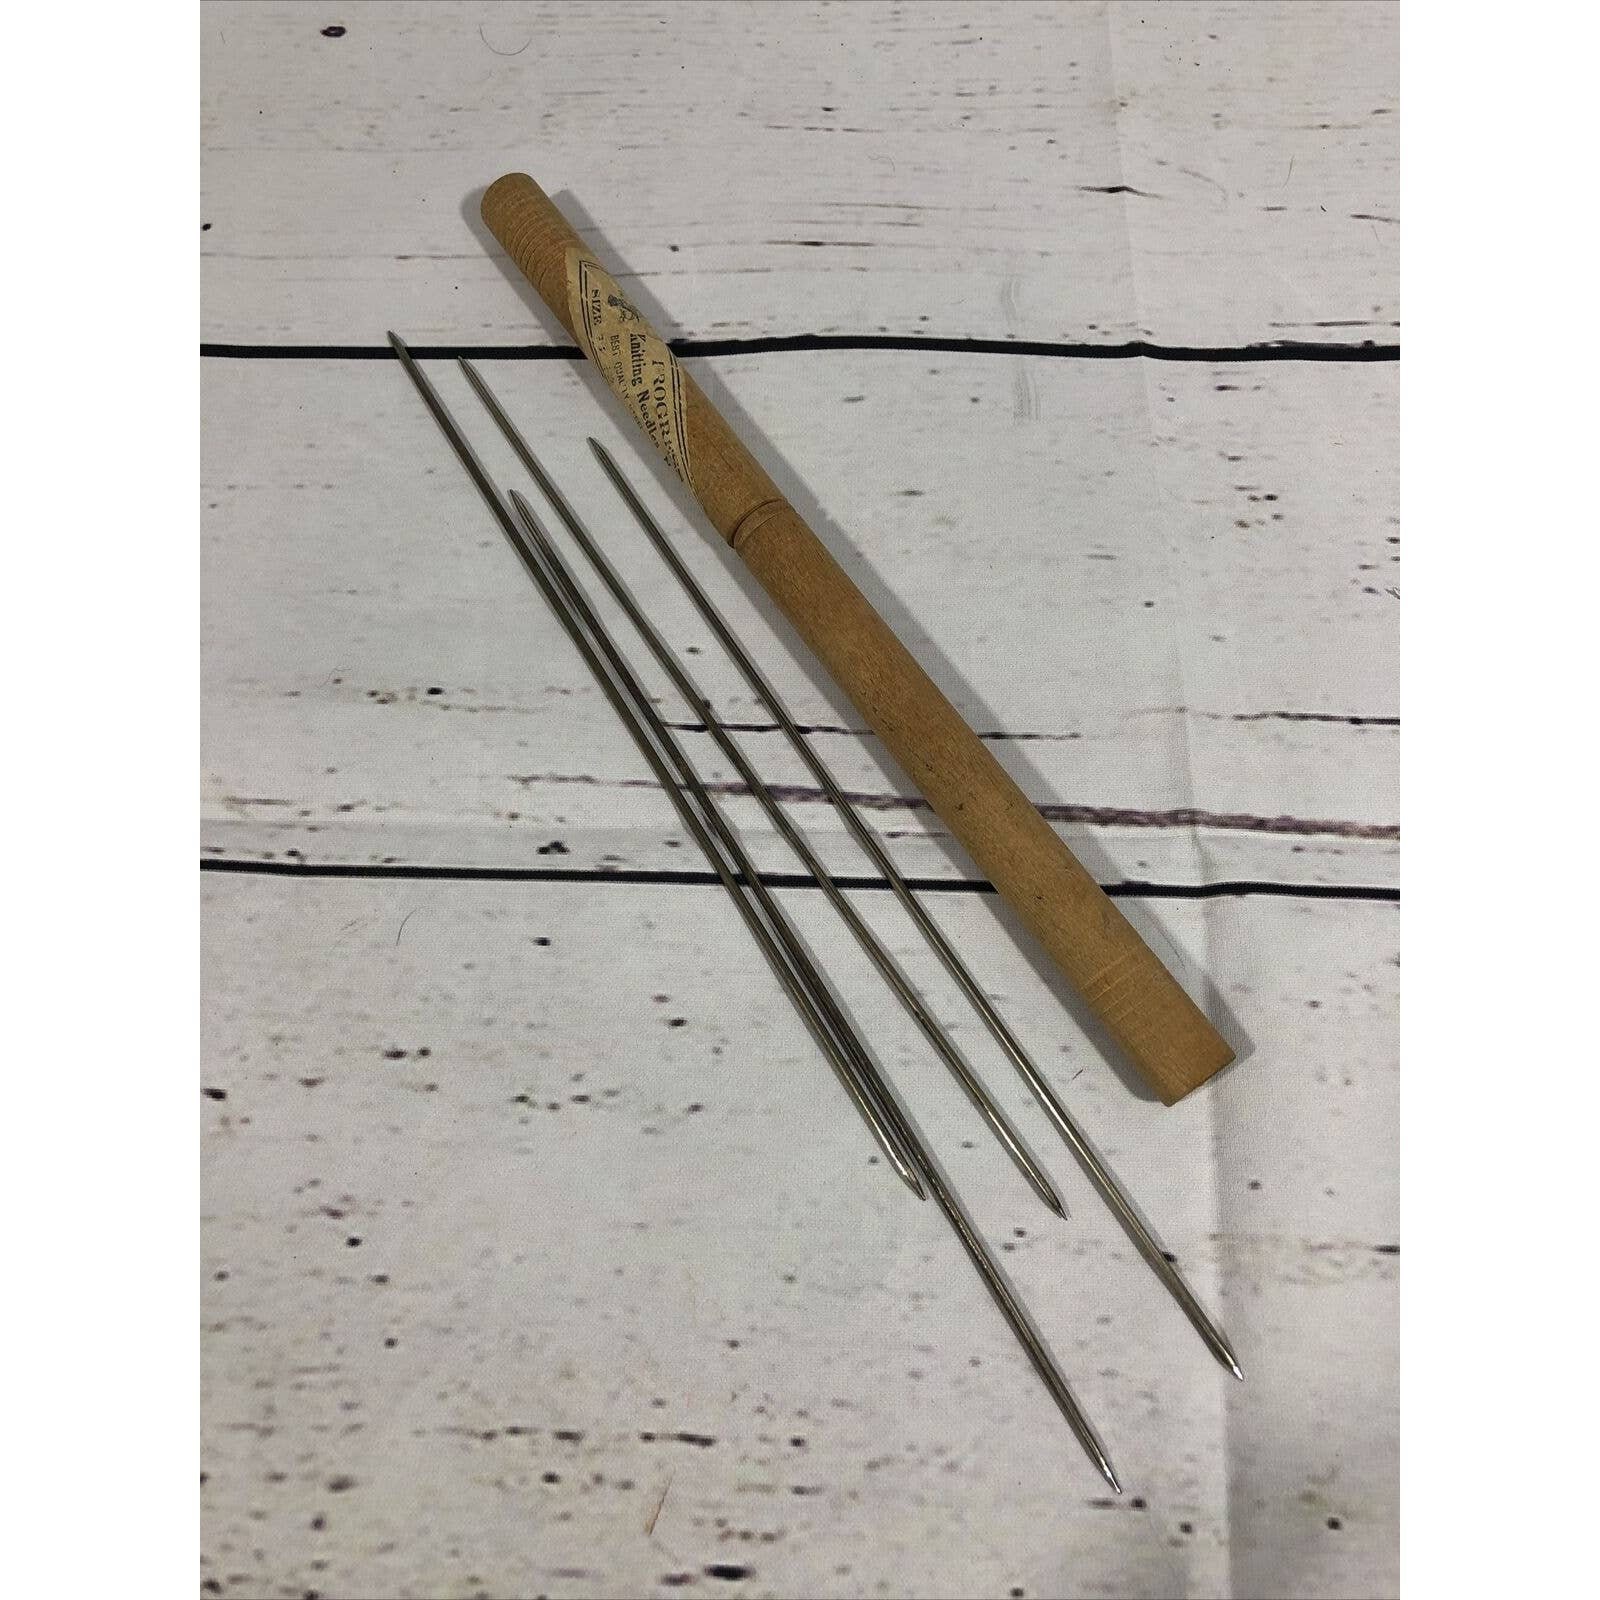 NEEDLEMASTER Interchangeable Circular Knitting Needle Set. 13 size tips  from 2 to 15 plus 4 different length cables and 2 connectors